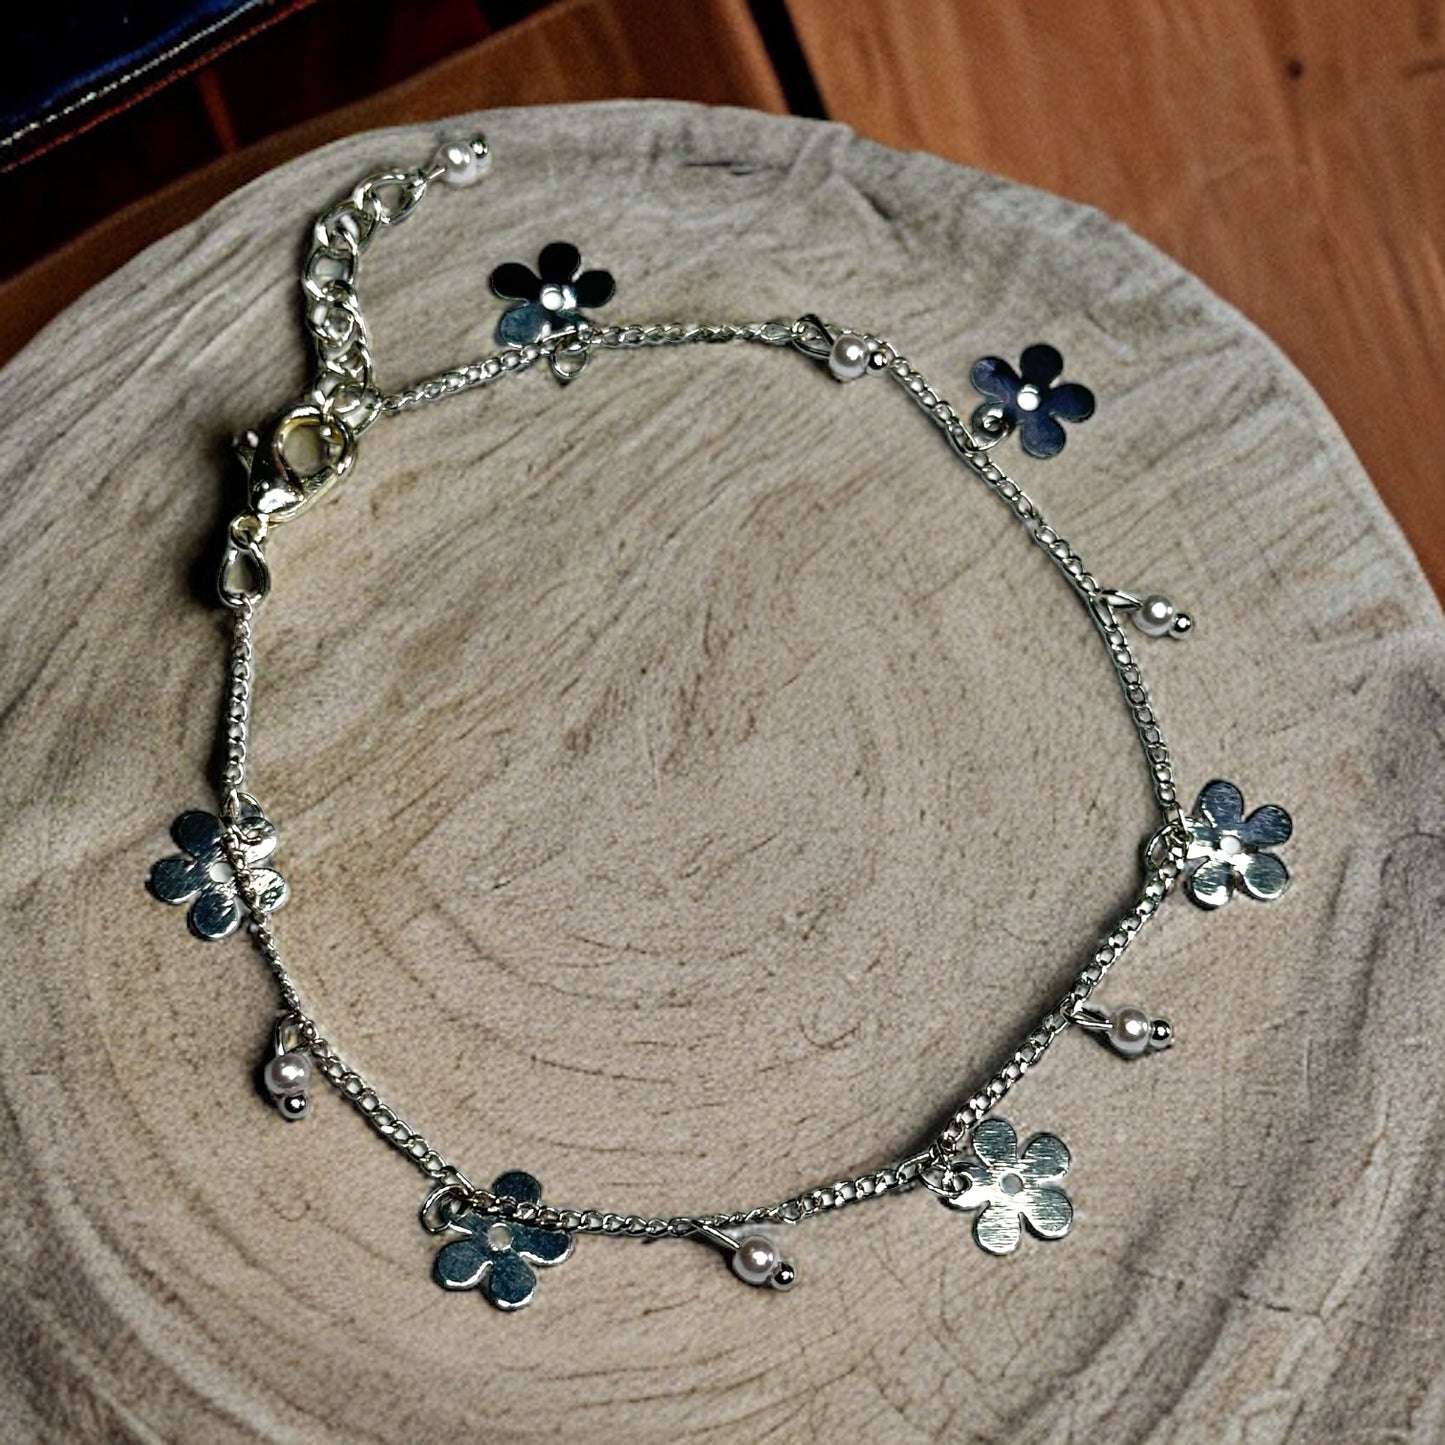 Pearl Bead and Flower Chain Bracelet